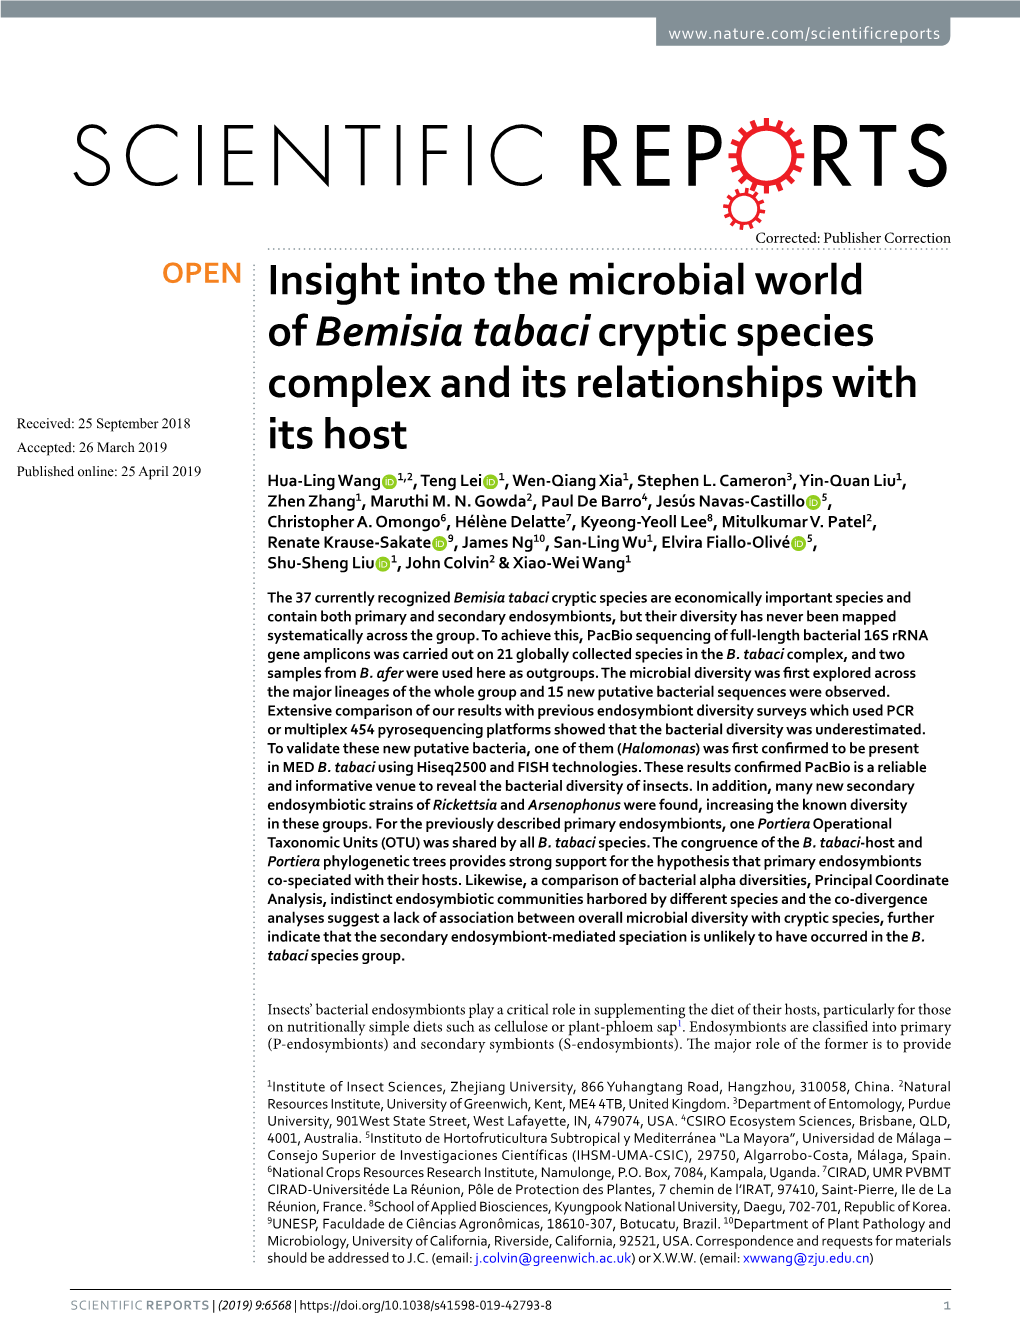 Insight Into the Microbial World of Bemisia Tabaci Cryptic Species